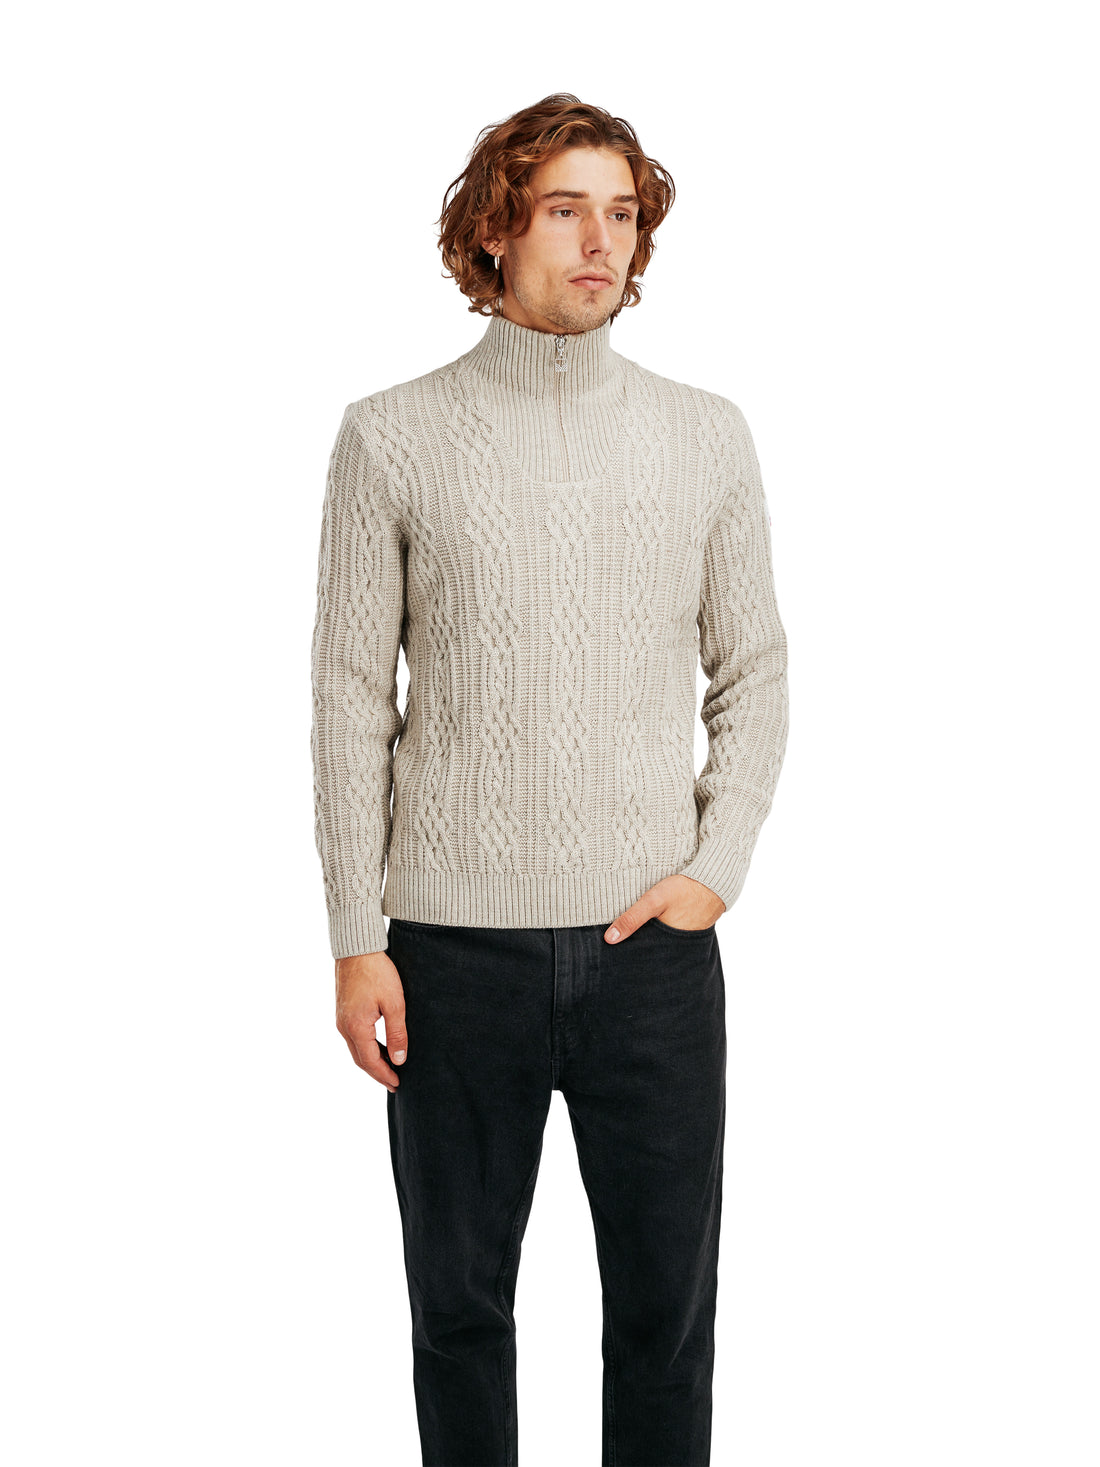 Dale of Norway - Hoven Sweater - Sand